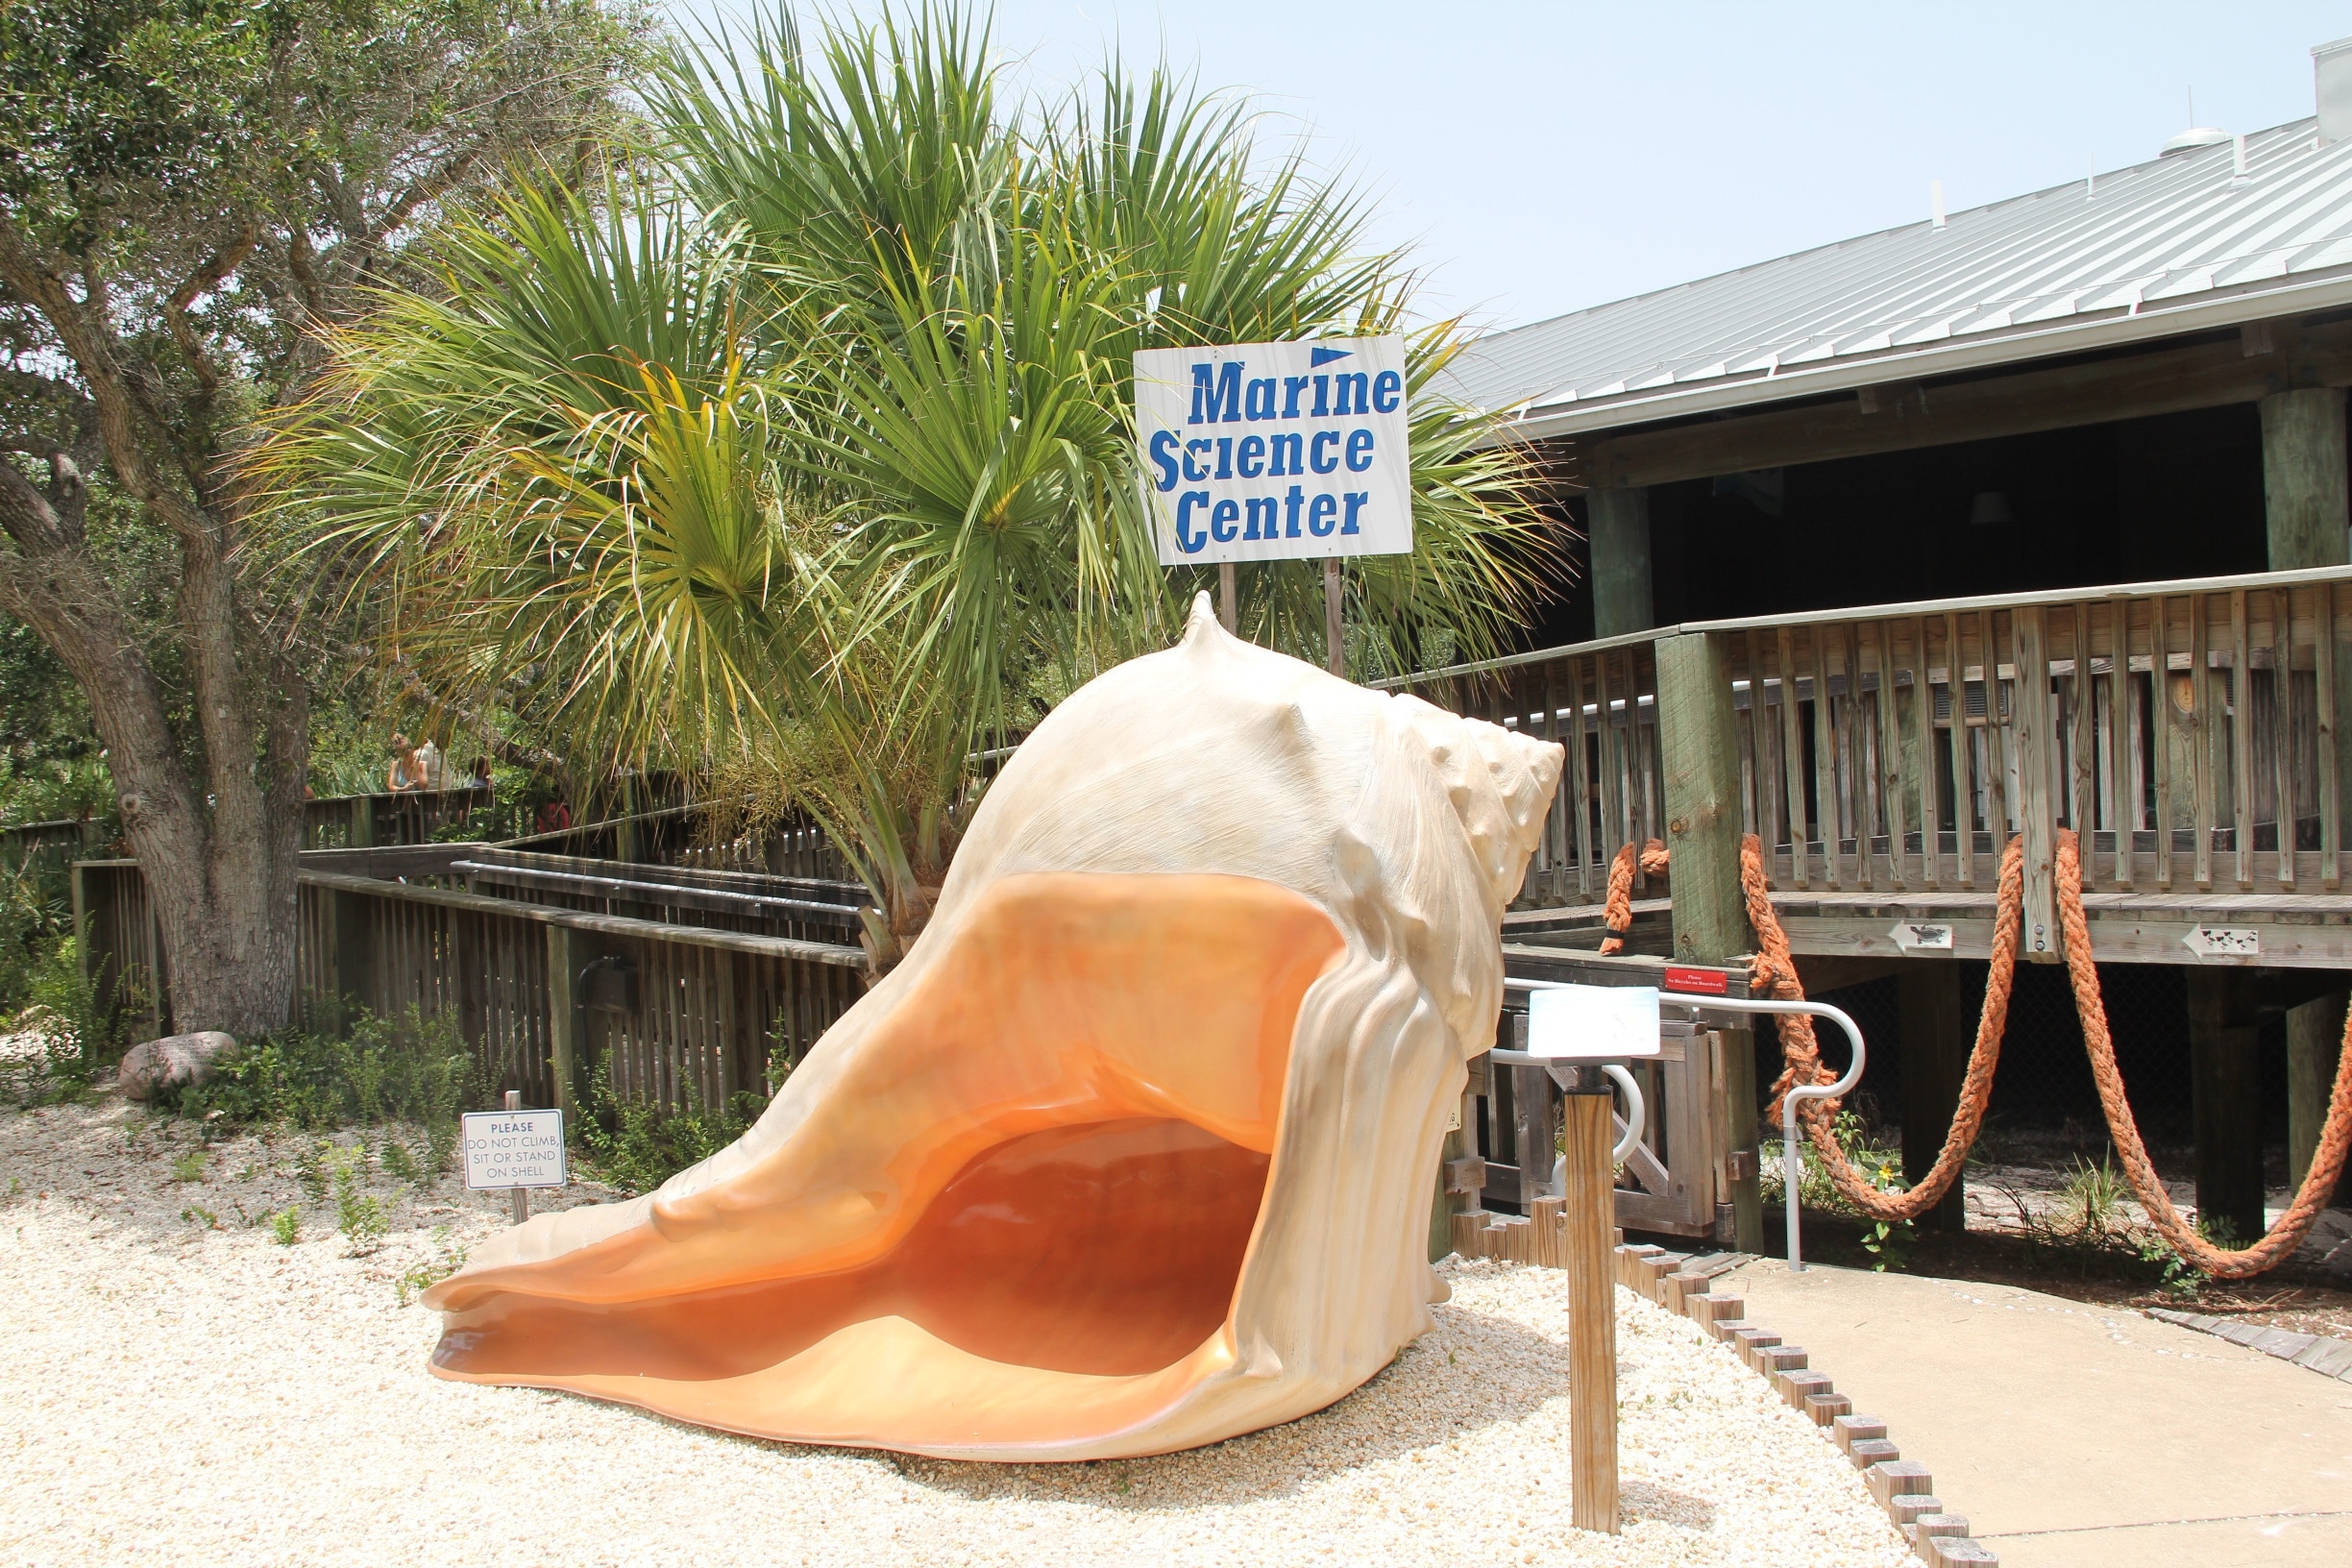 Marine Science Center, Ponce Inlet, Florida, USA